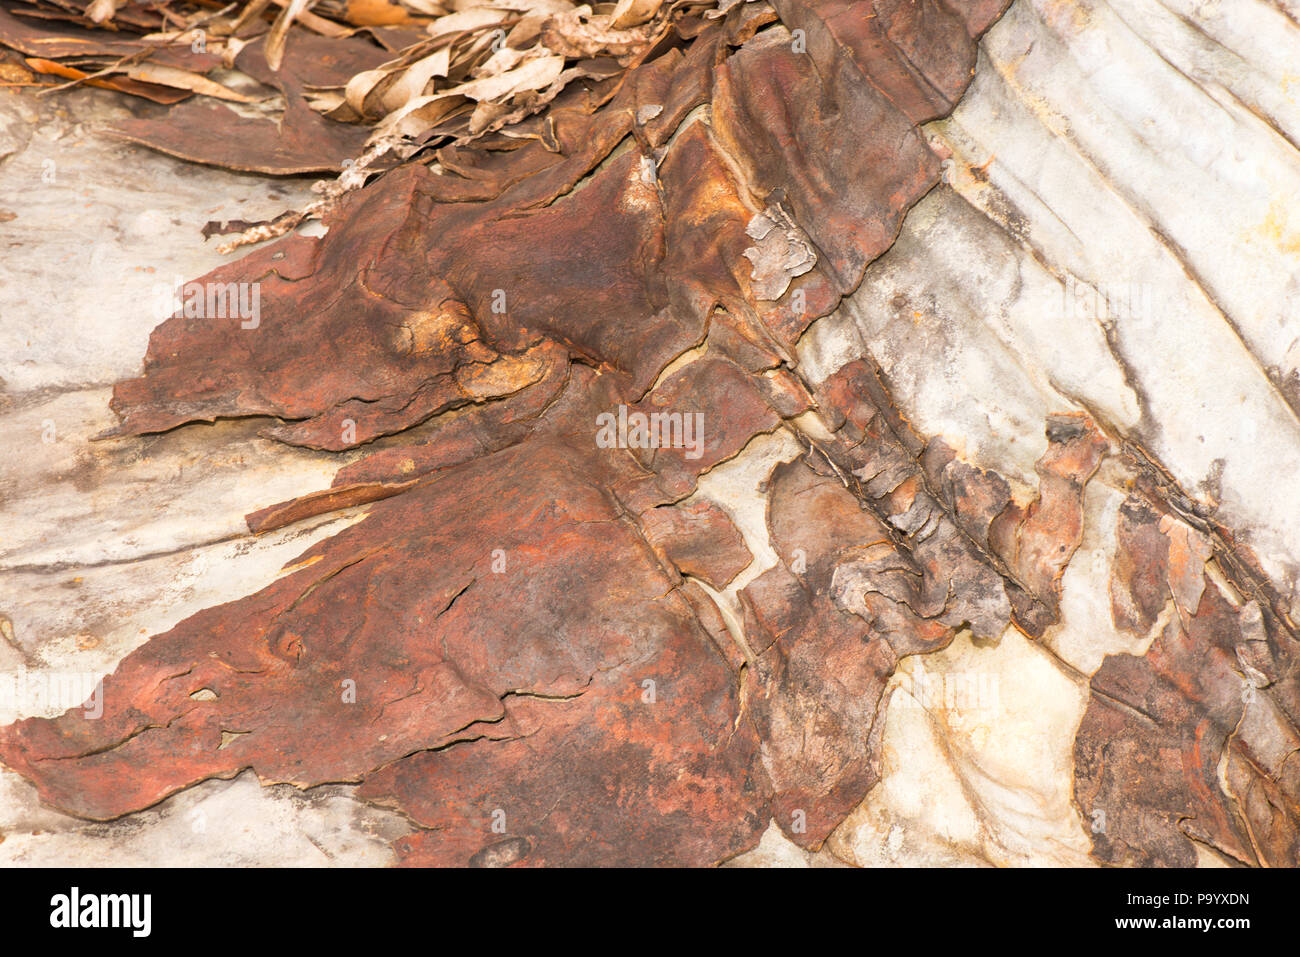 Abstract of bark on a Australian gum tree, for texture or overlay. Stock Photo